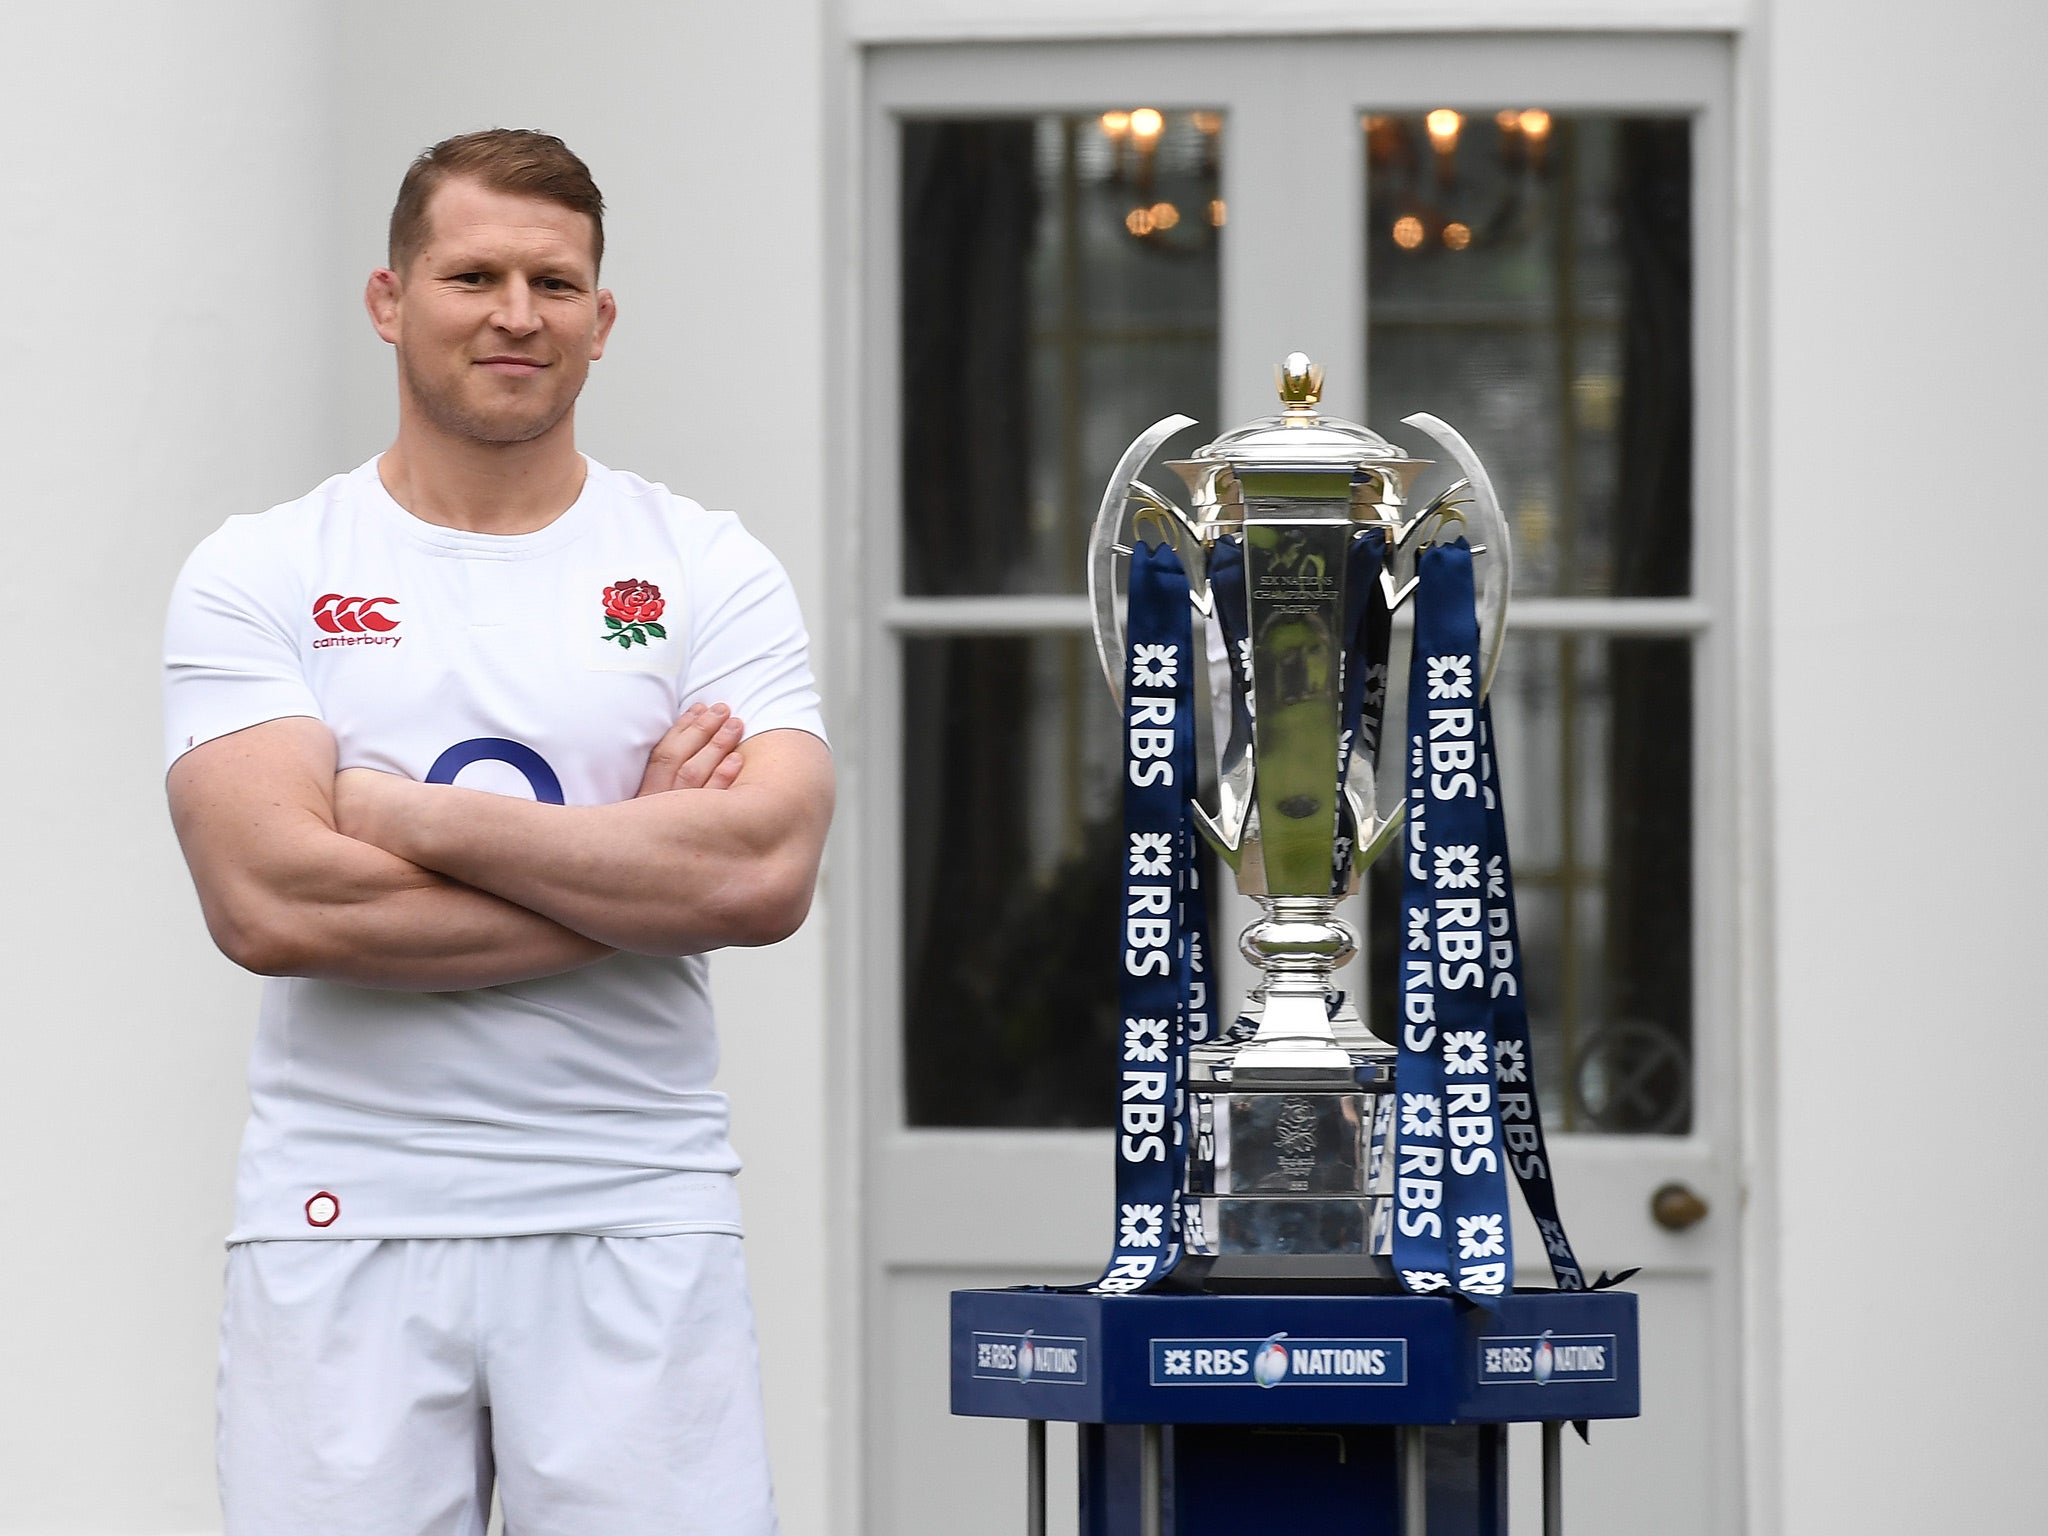 Dylan Hartley's chances of captaining the Lions have been affected by indiscipline